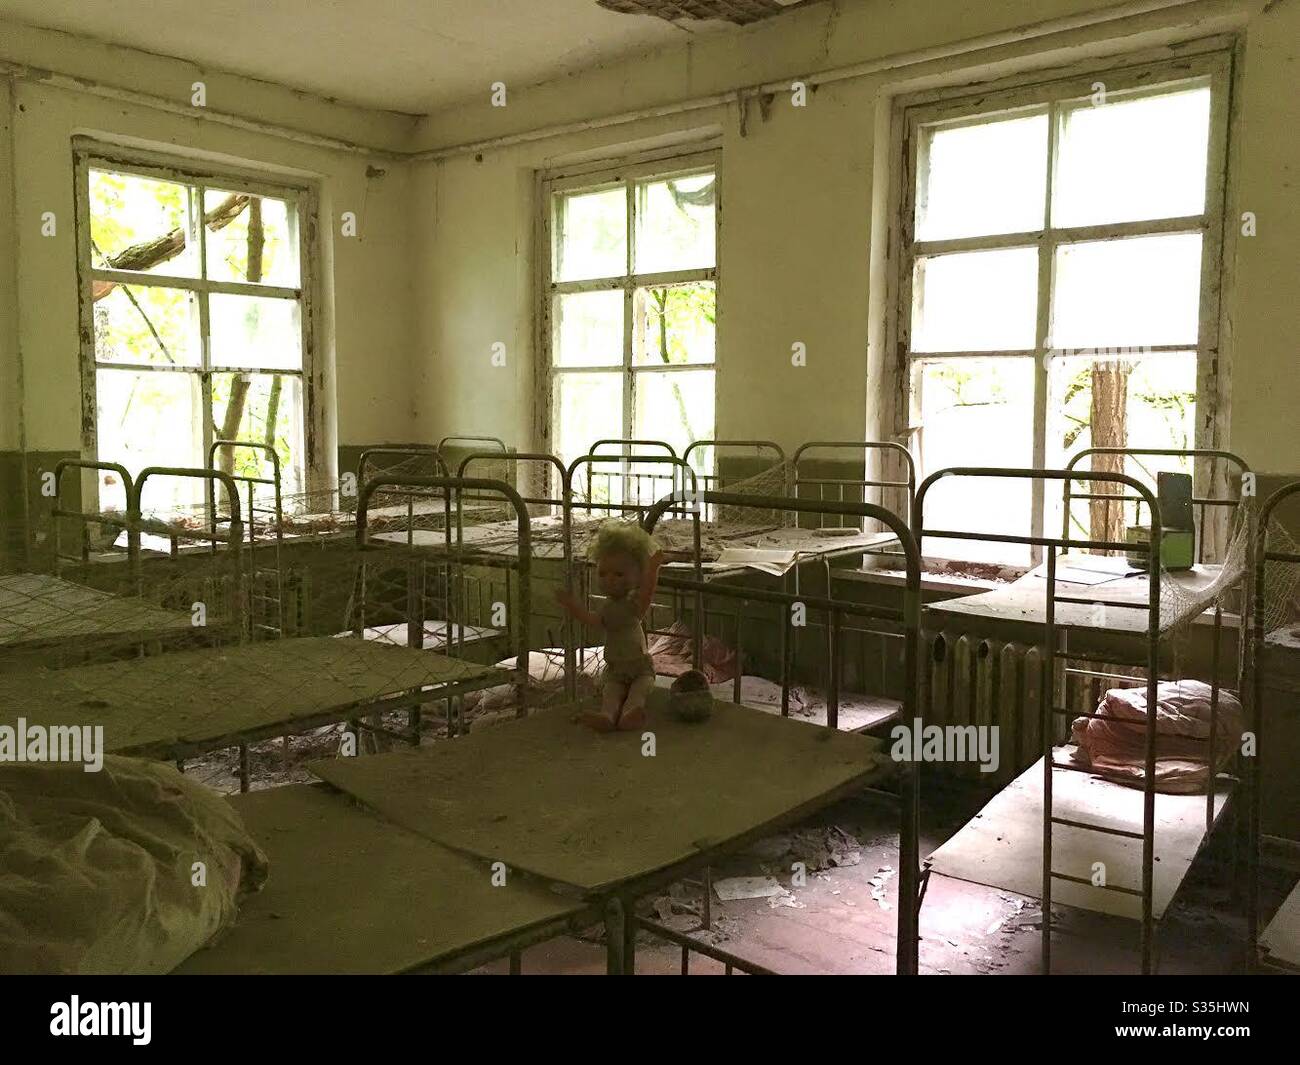 Chernobyl Ukraine dormitory in a public school room after the nuclear disaster in 1986 Stock Photo